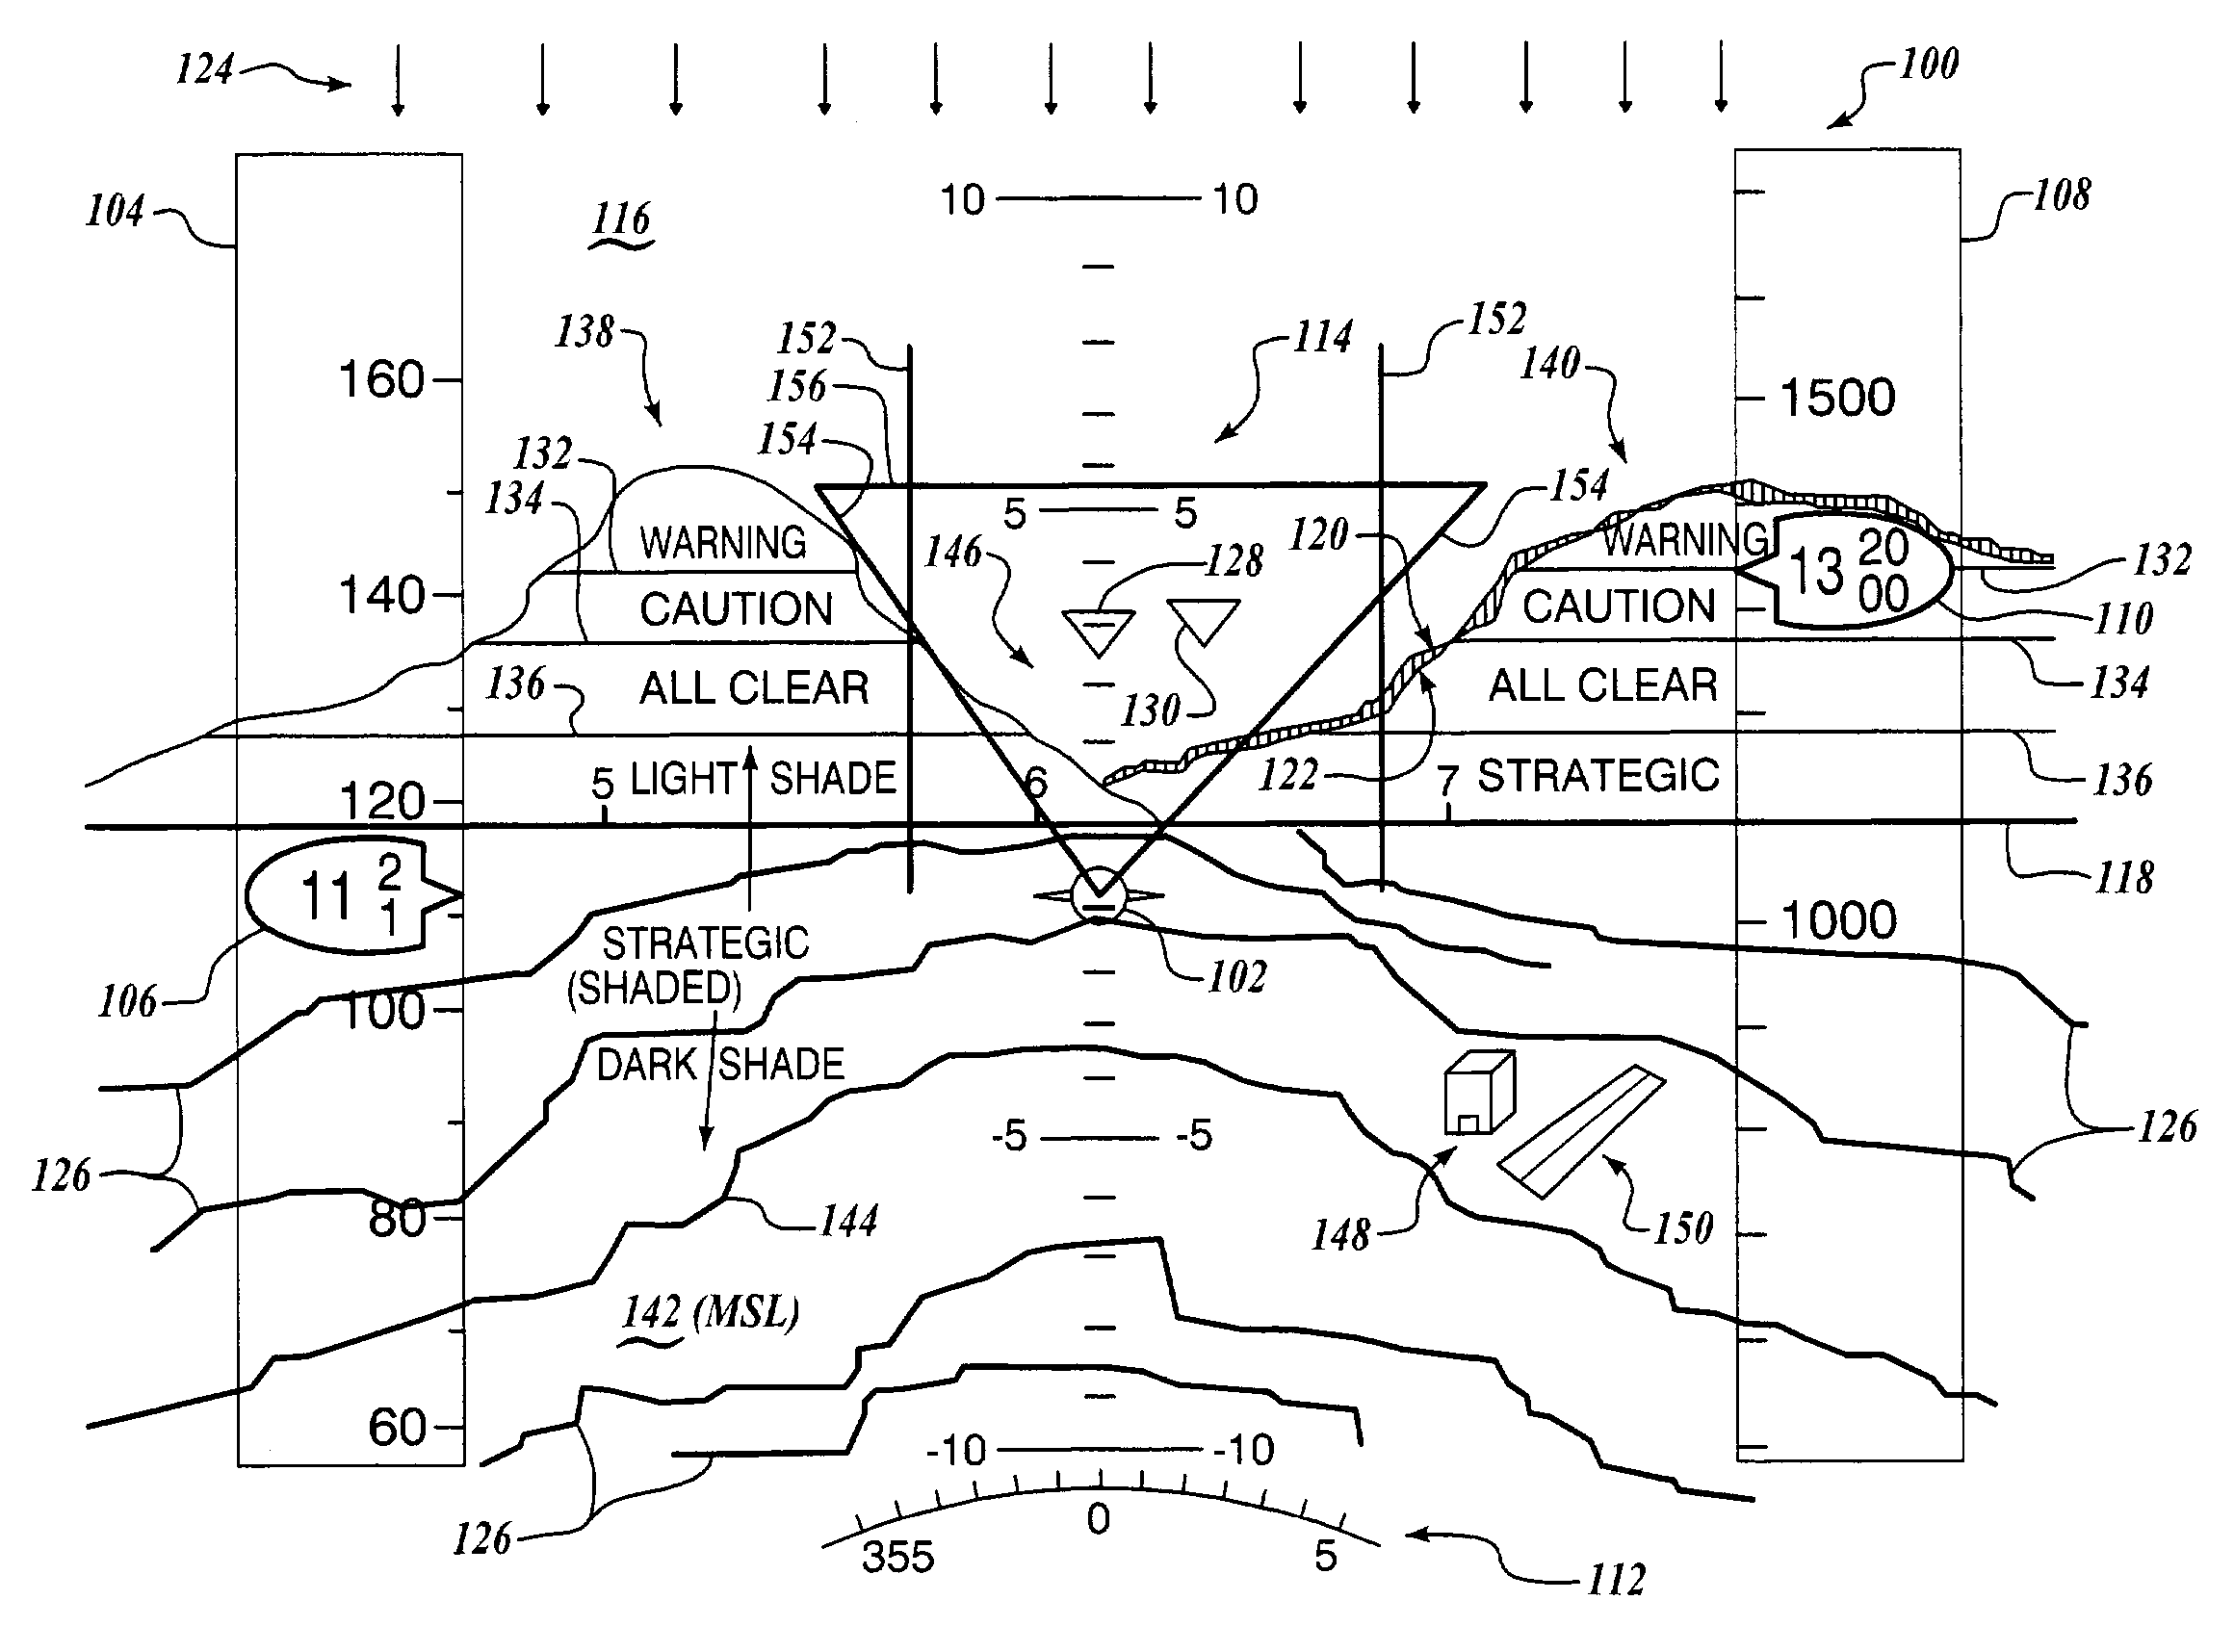 Display methodology for encoding simultaneous absolute and relative altitude terrain data